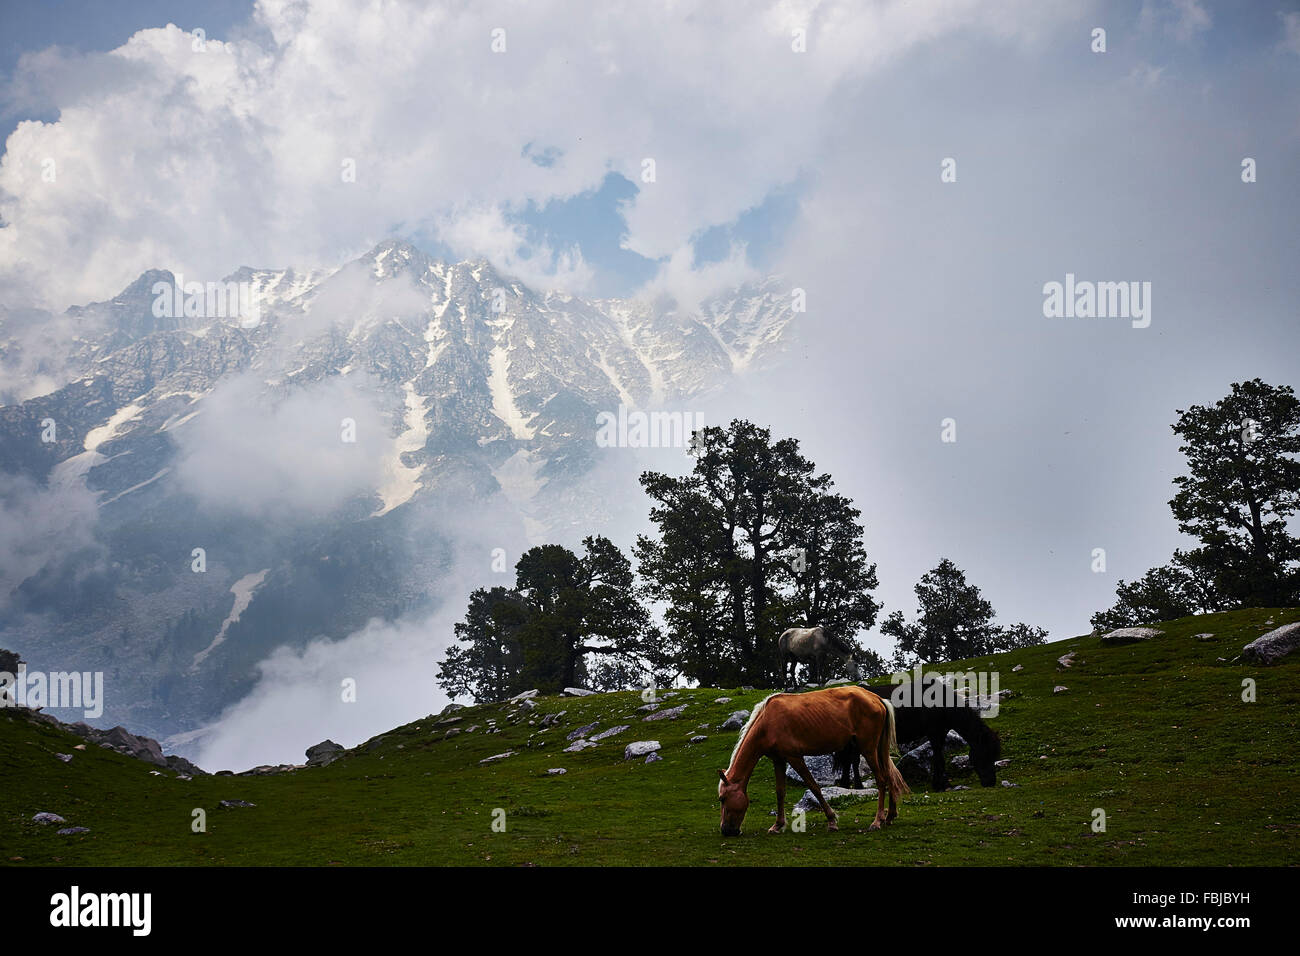 L'Himalaya indien, chevaux, Indrahar pass, snow summit, Dhauladhar, Himachal Pradesh, Inde Banque D'Images